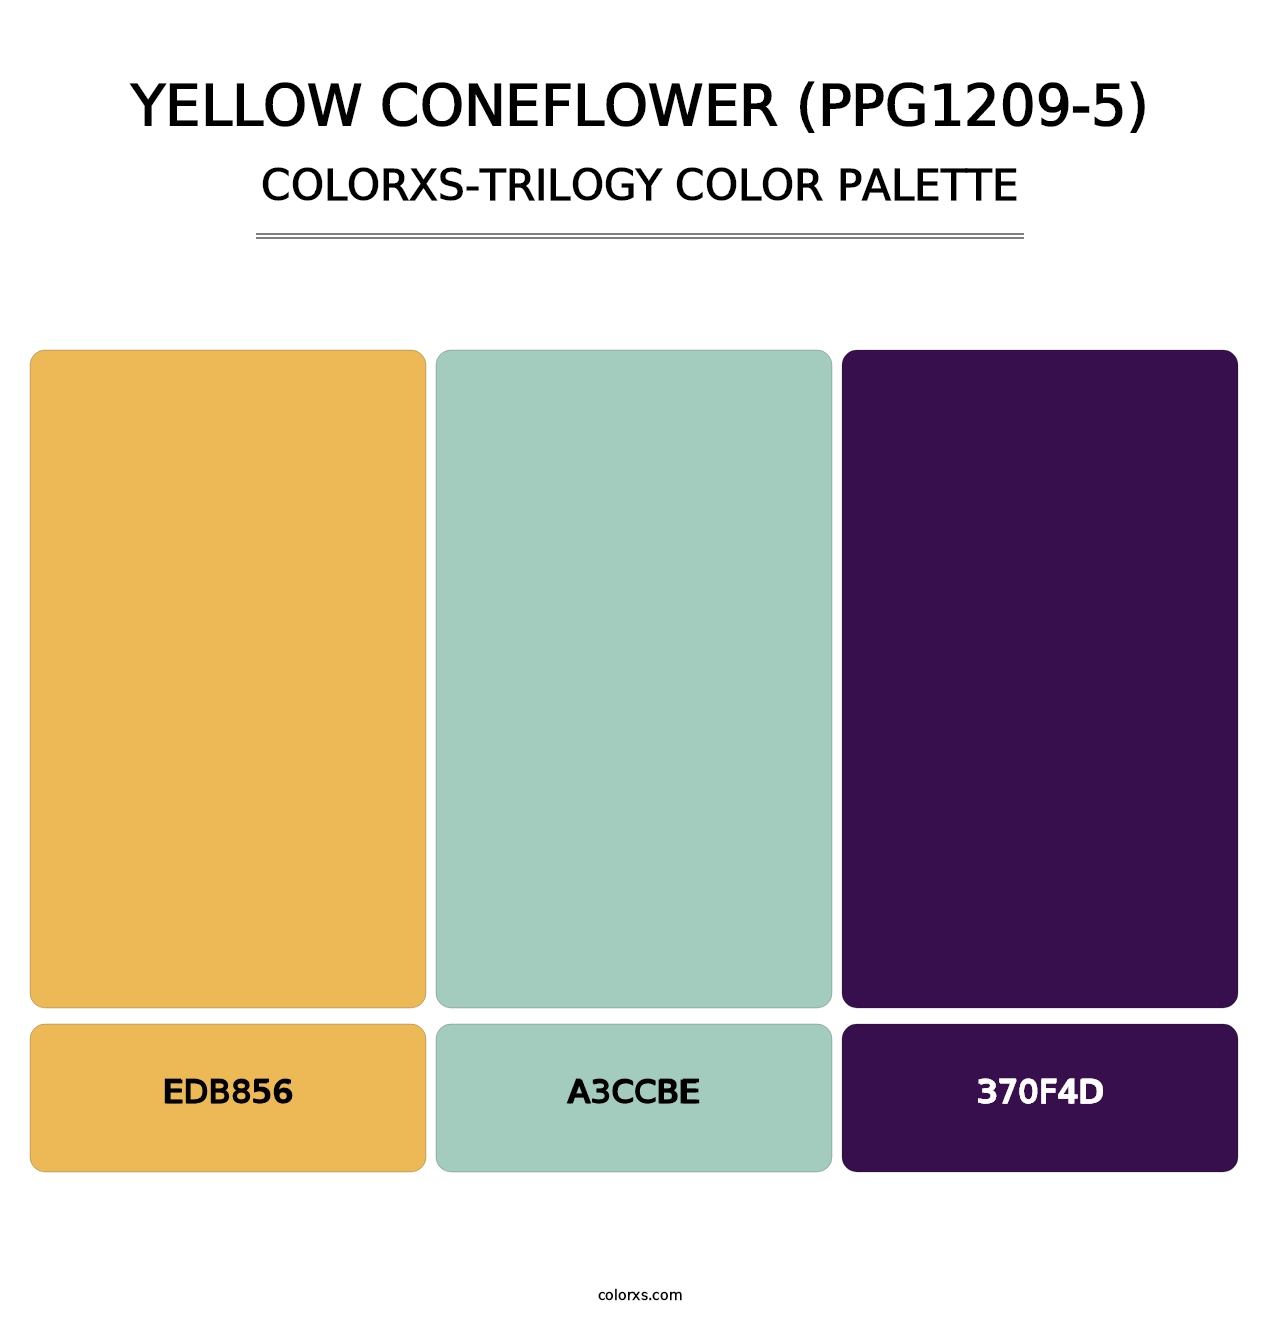 Yellow Coneflower (PPG1209-5) - Colorxs Trilogy Palette